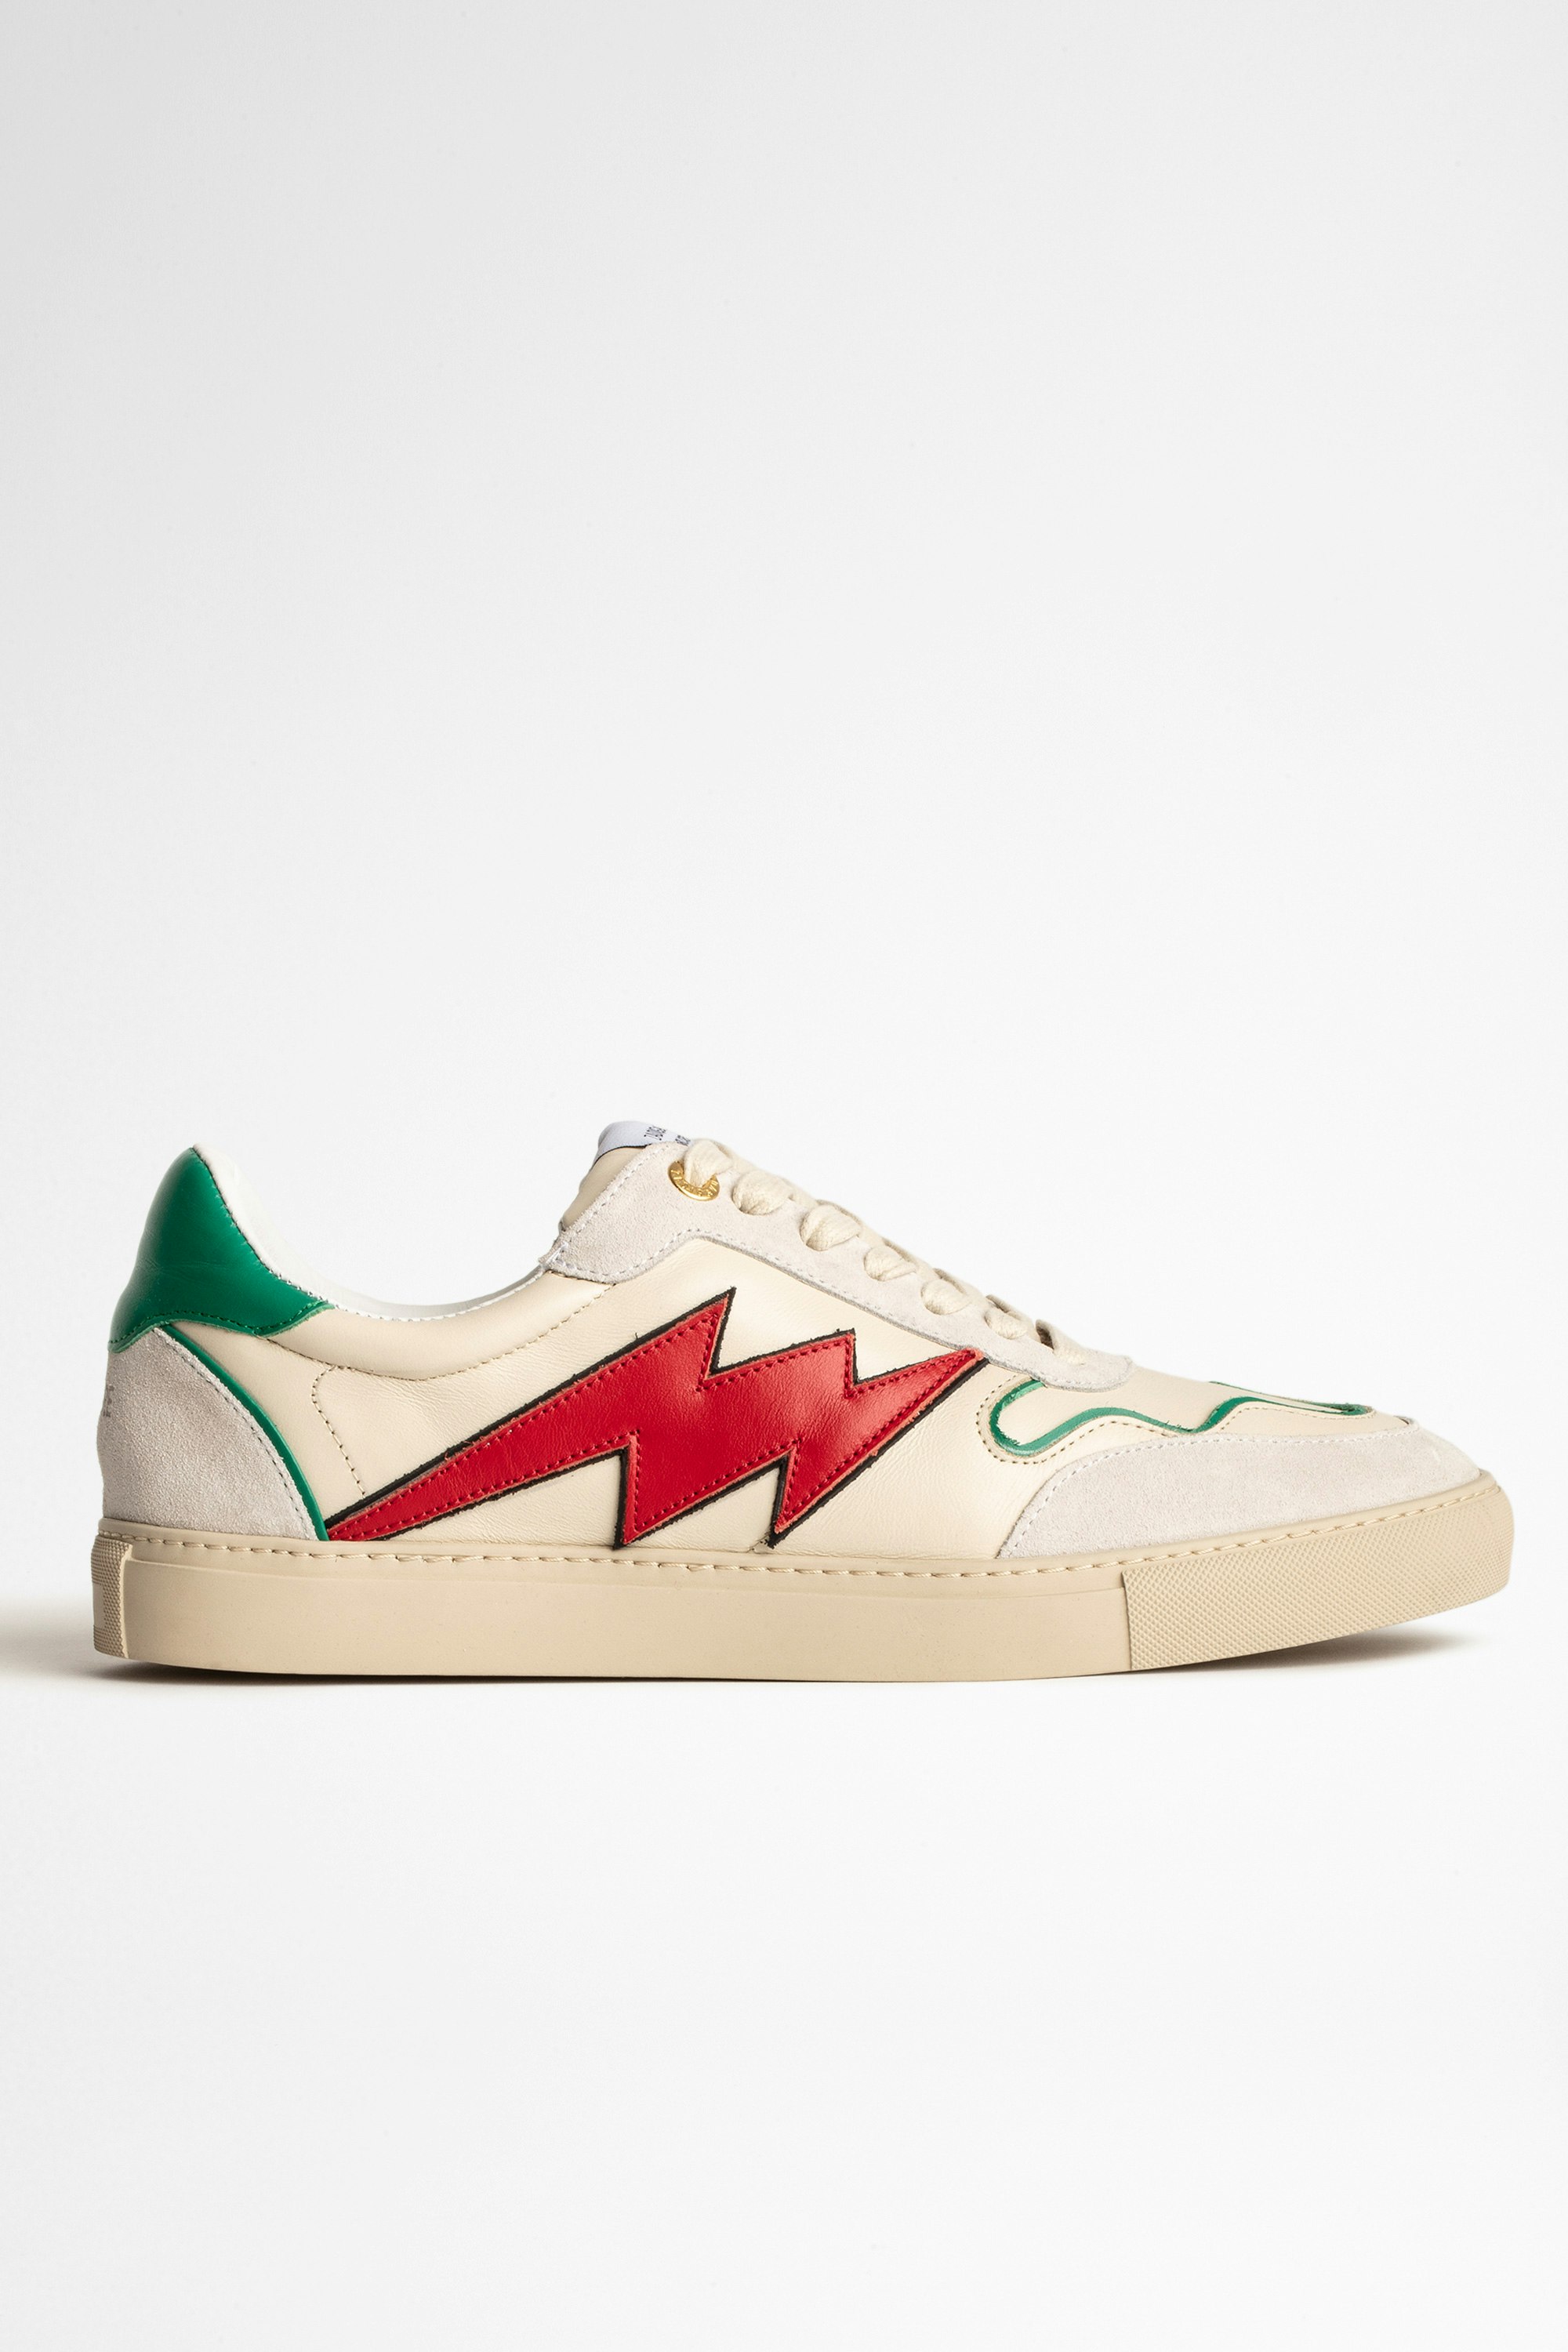 ZV1747 Board Trainers - Men’s white leather sneakers with contrasting lightning bolt detail.